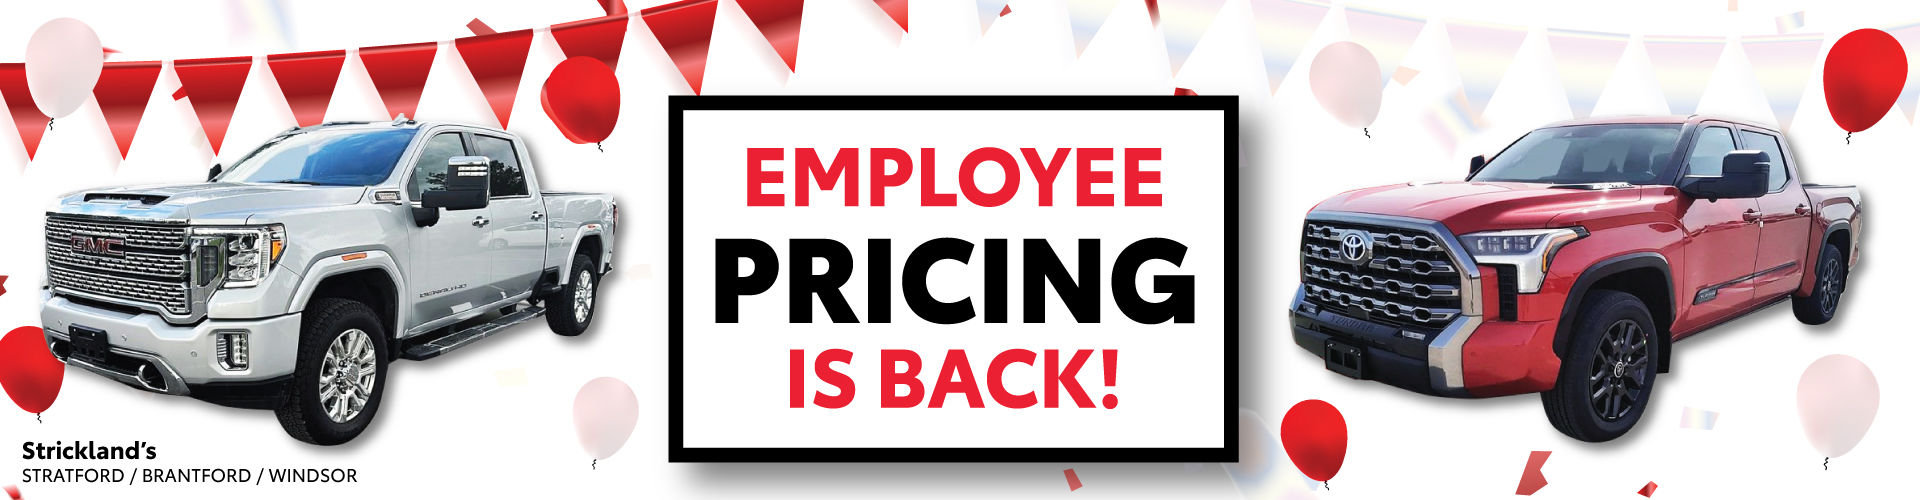 Employee Pricing is Back